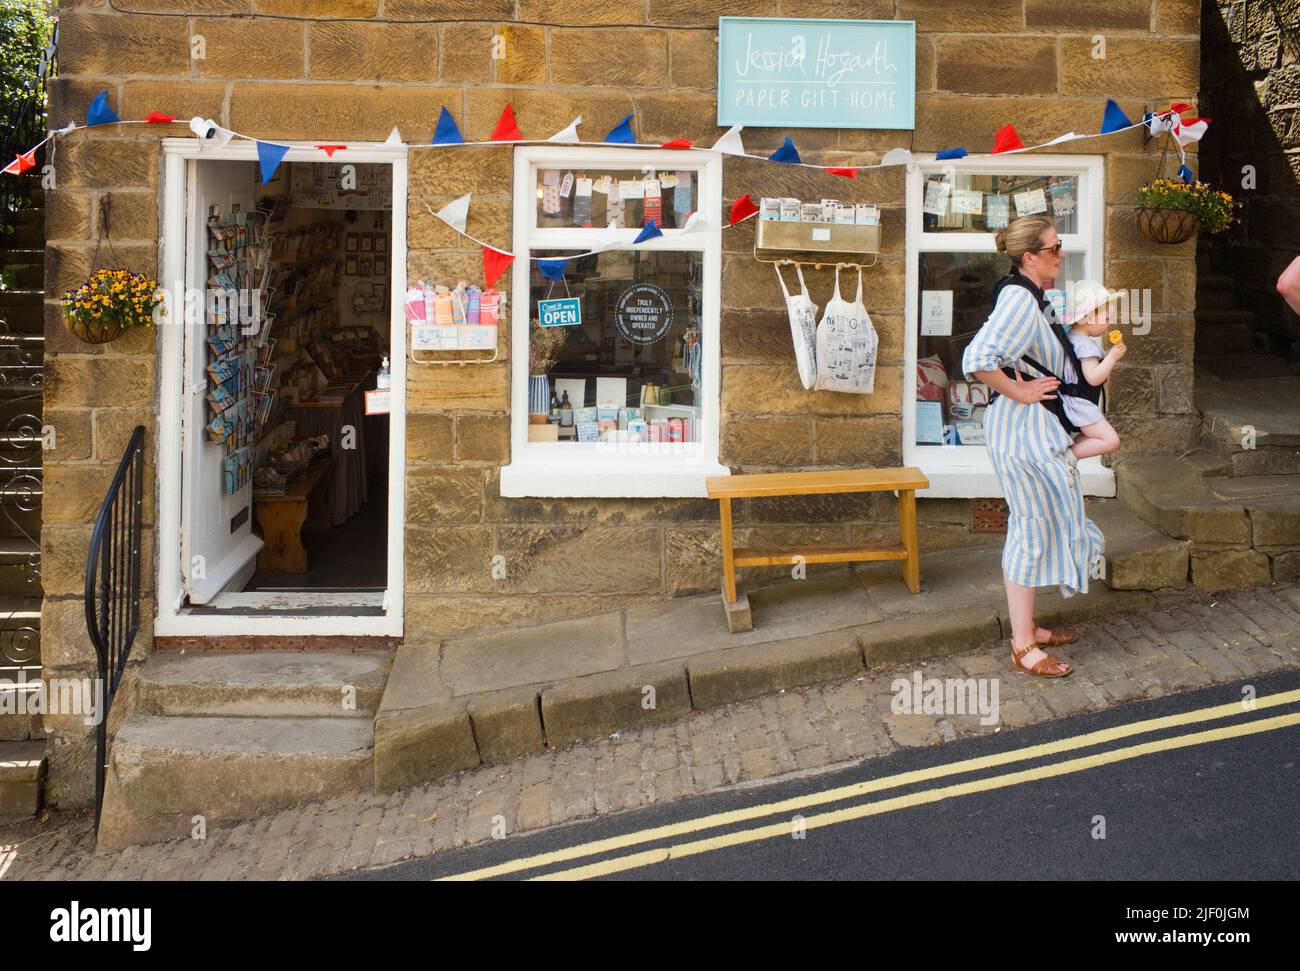 The Jessica Hogarth gift and crafts shop on the steep road in Robin Hood's Bay Stock Photo